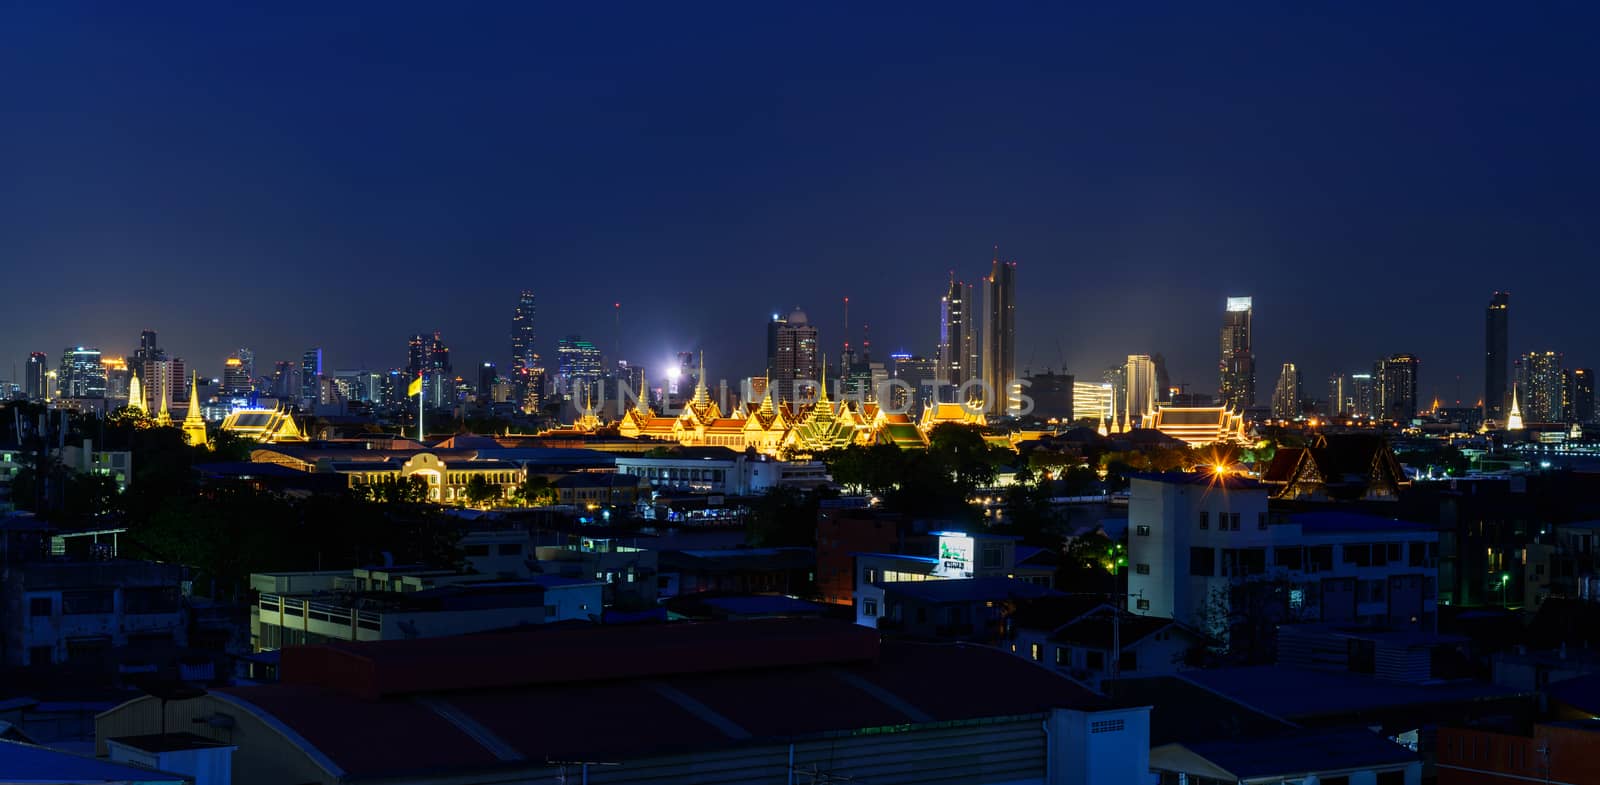 Bangkok , Thailand - 19 June, 2020: Panorama view of Wat Phra Keaw Public landmark in Thailand in night time and city in background